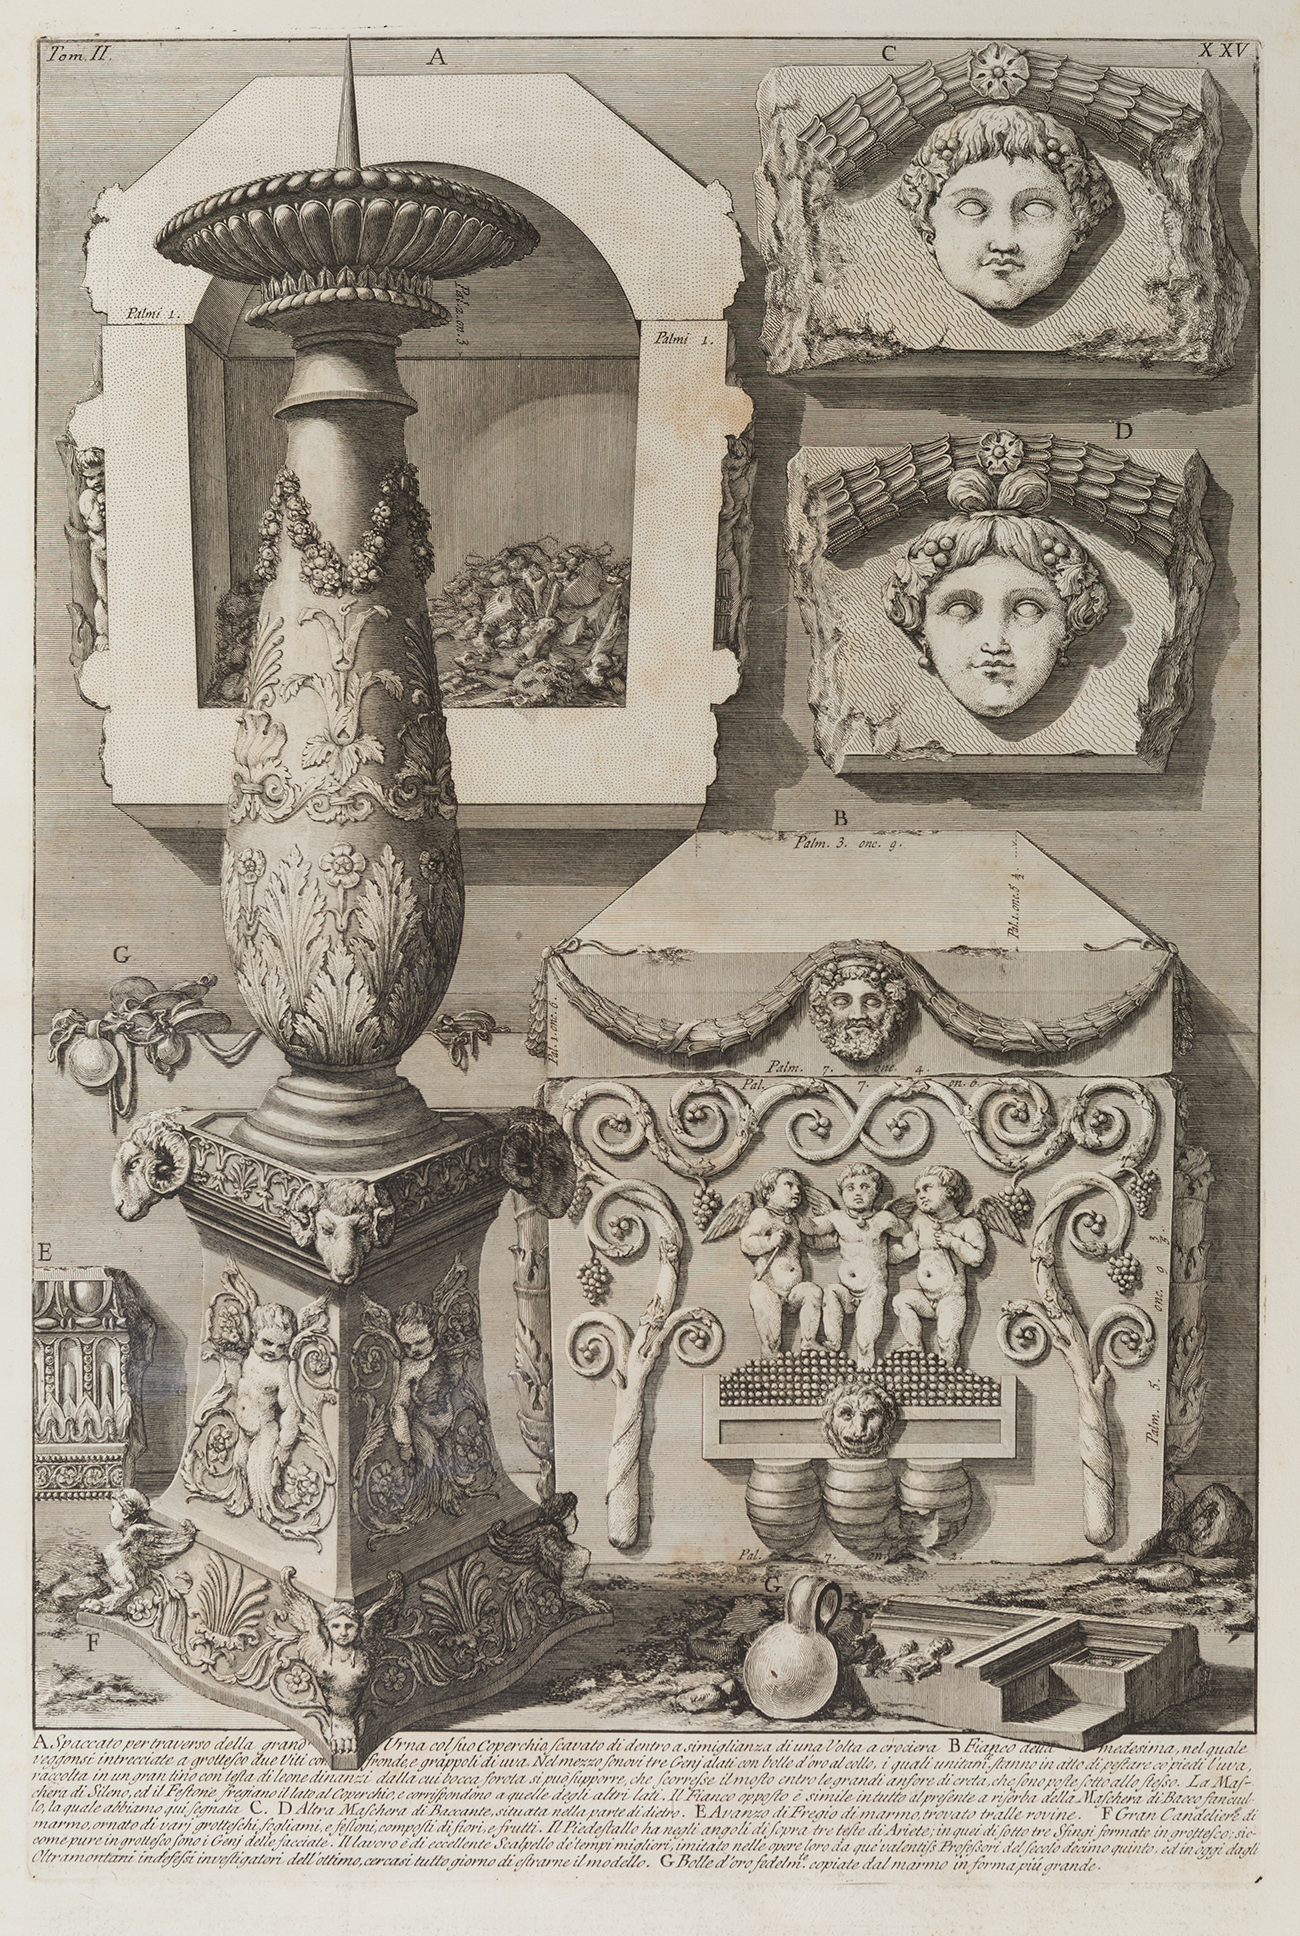 BATTISTA GIOVANNI PIRANESI (Italy, 1720-1778)."Roman antiquities. Large porphyry urn in which the